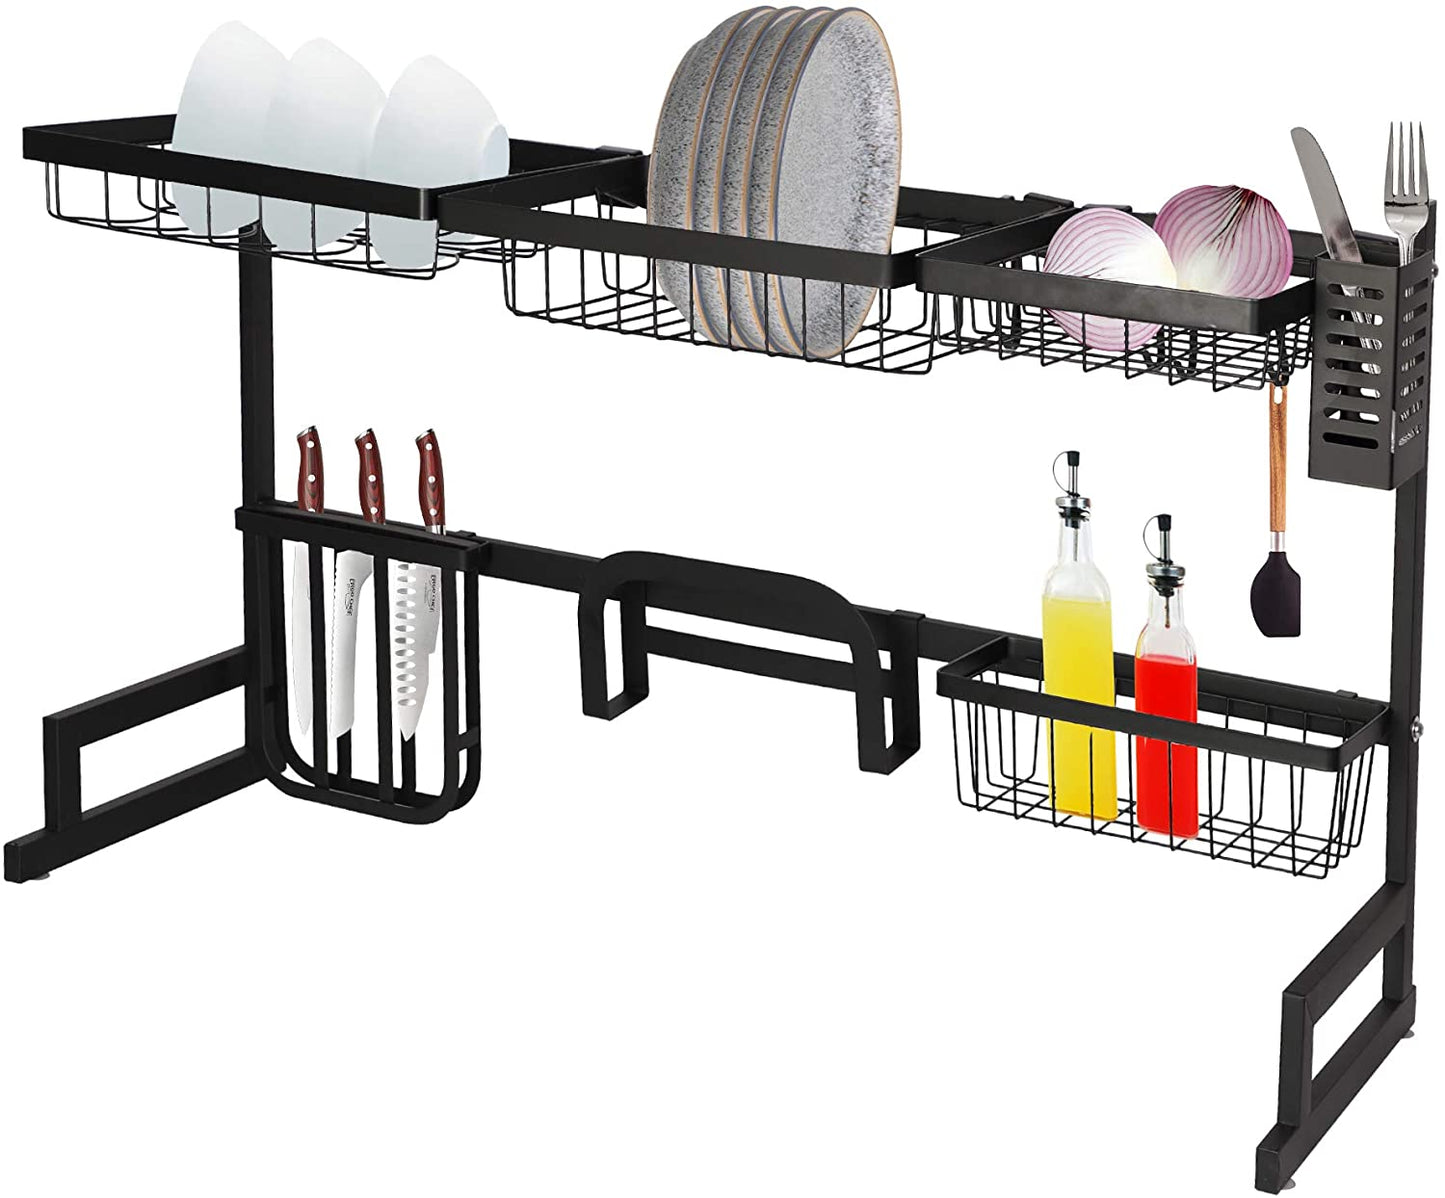 2 Tier Dish Rack, Above Sink Shelf, Weight Up to 88 pounds, W/Utensils Holder, Premium Stainless Steel, (Sink size<33.6in) Space Saver, for Bow, knife, Chopsticks, Space Organizer, Black